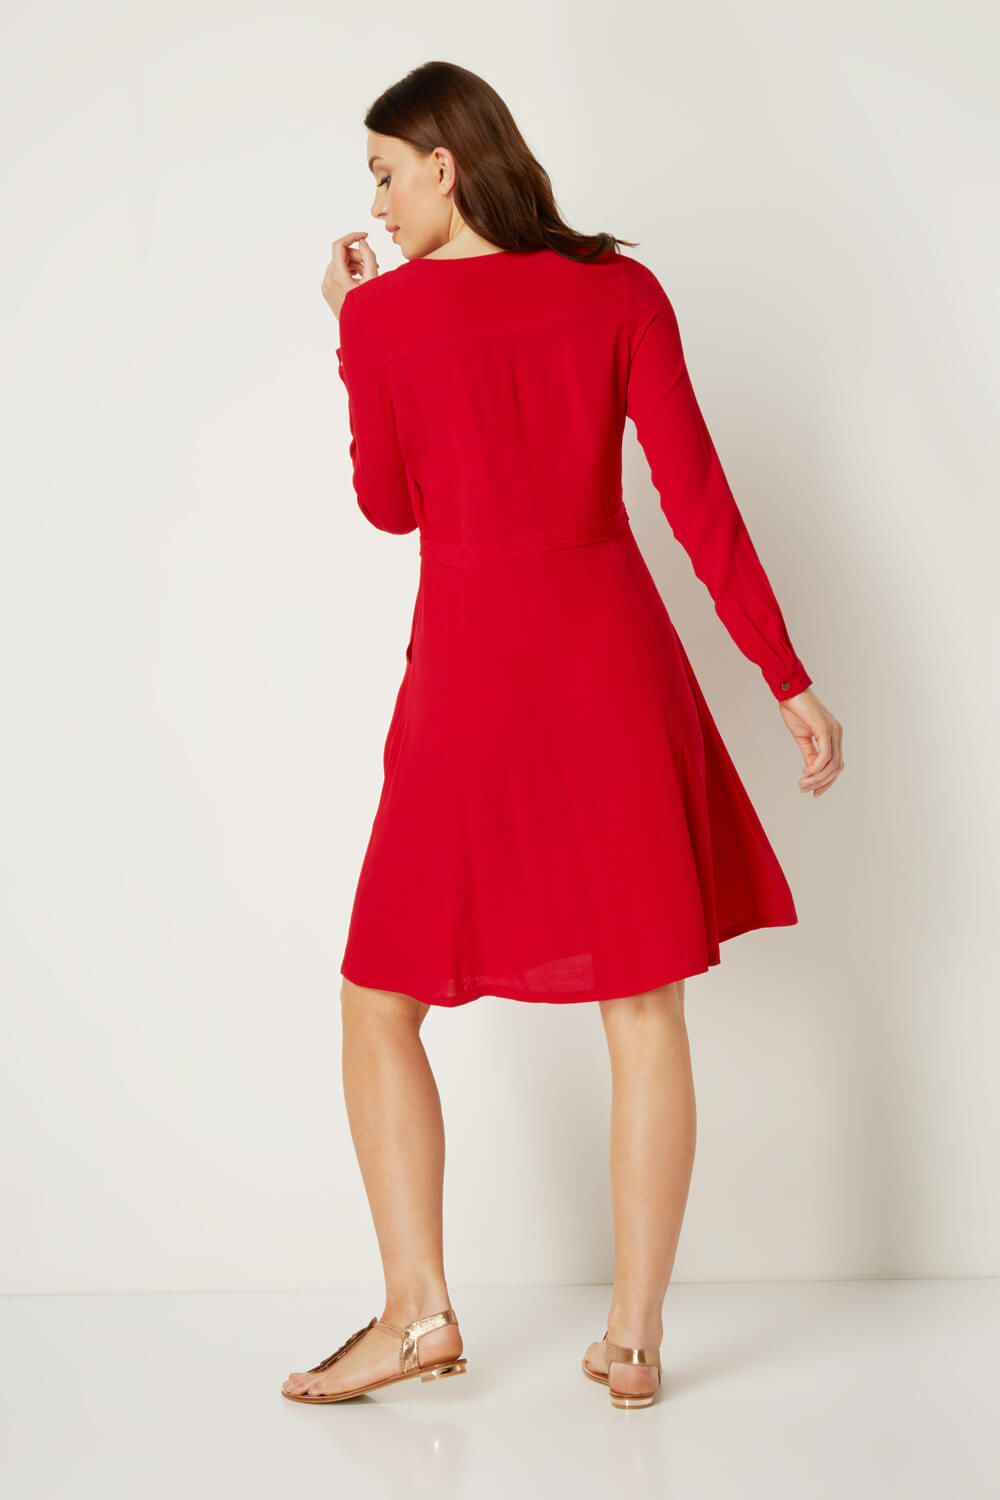 Red Fit and Flare Shirt Dress, Image 3 of 4